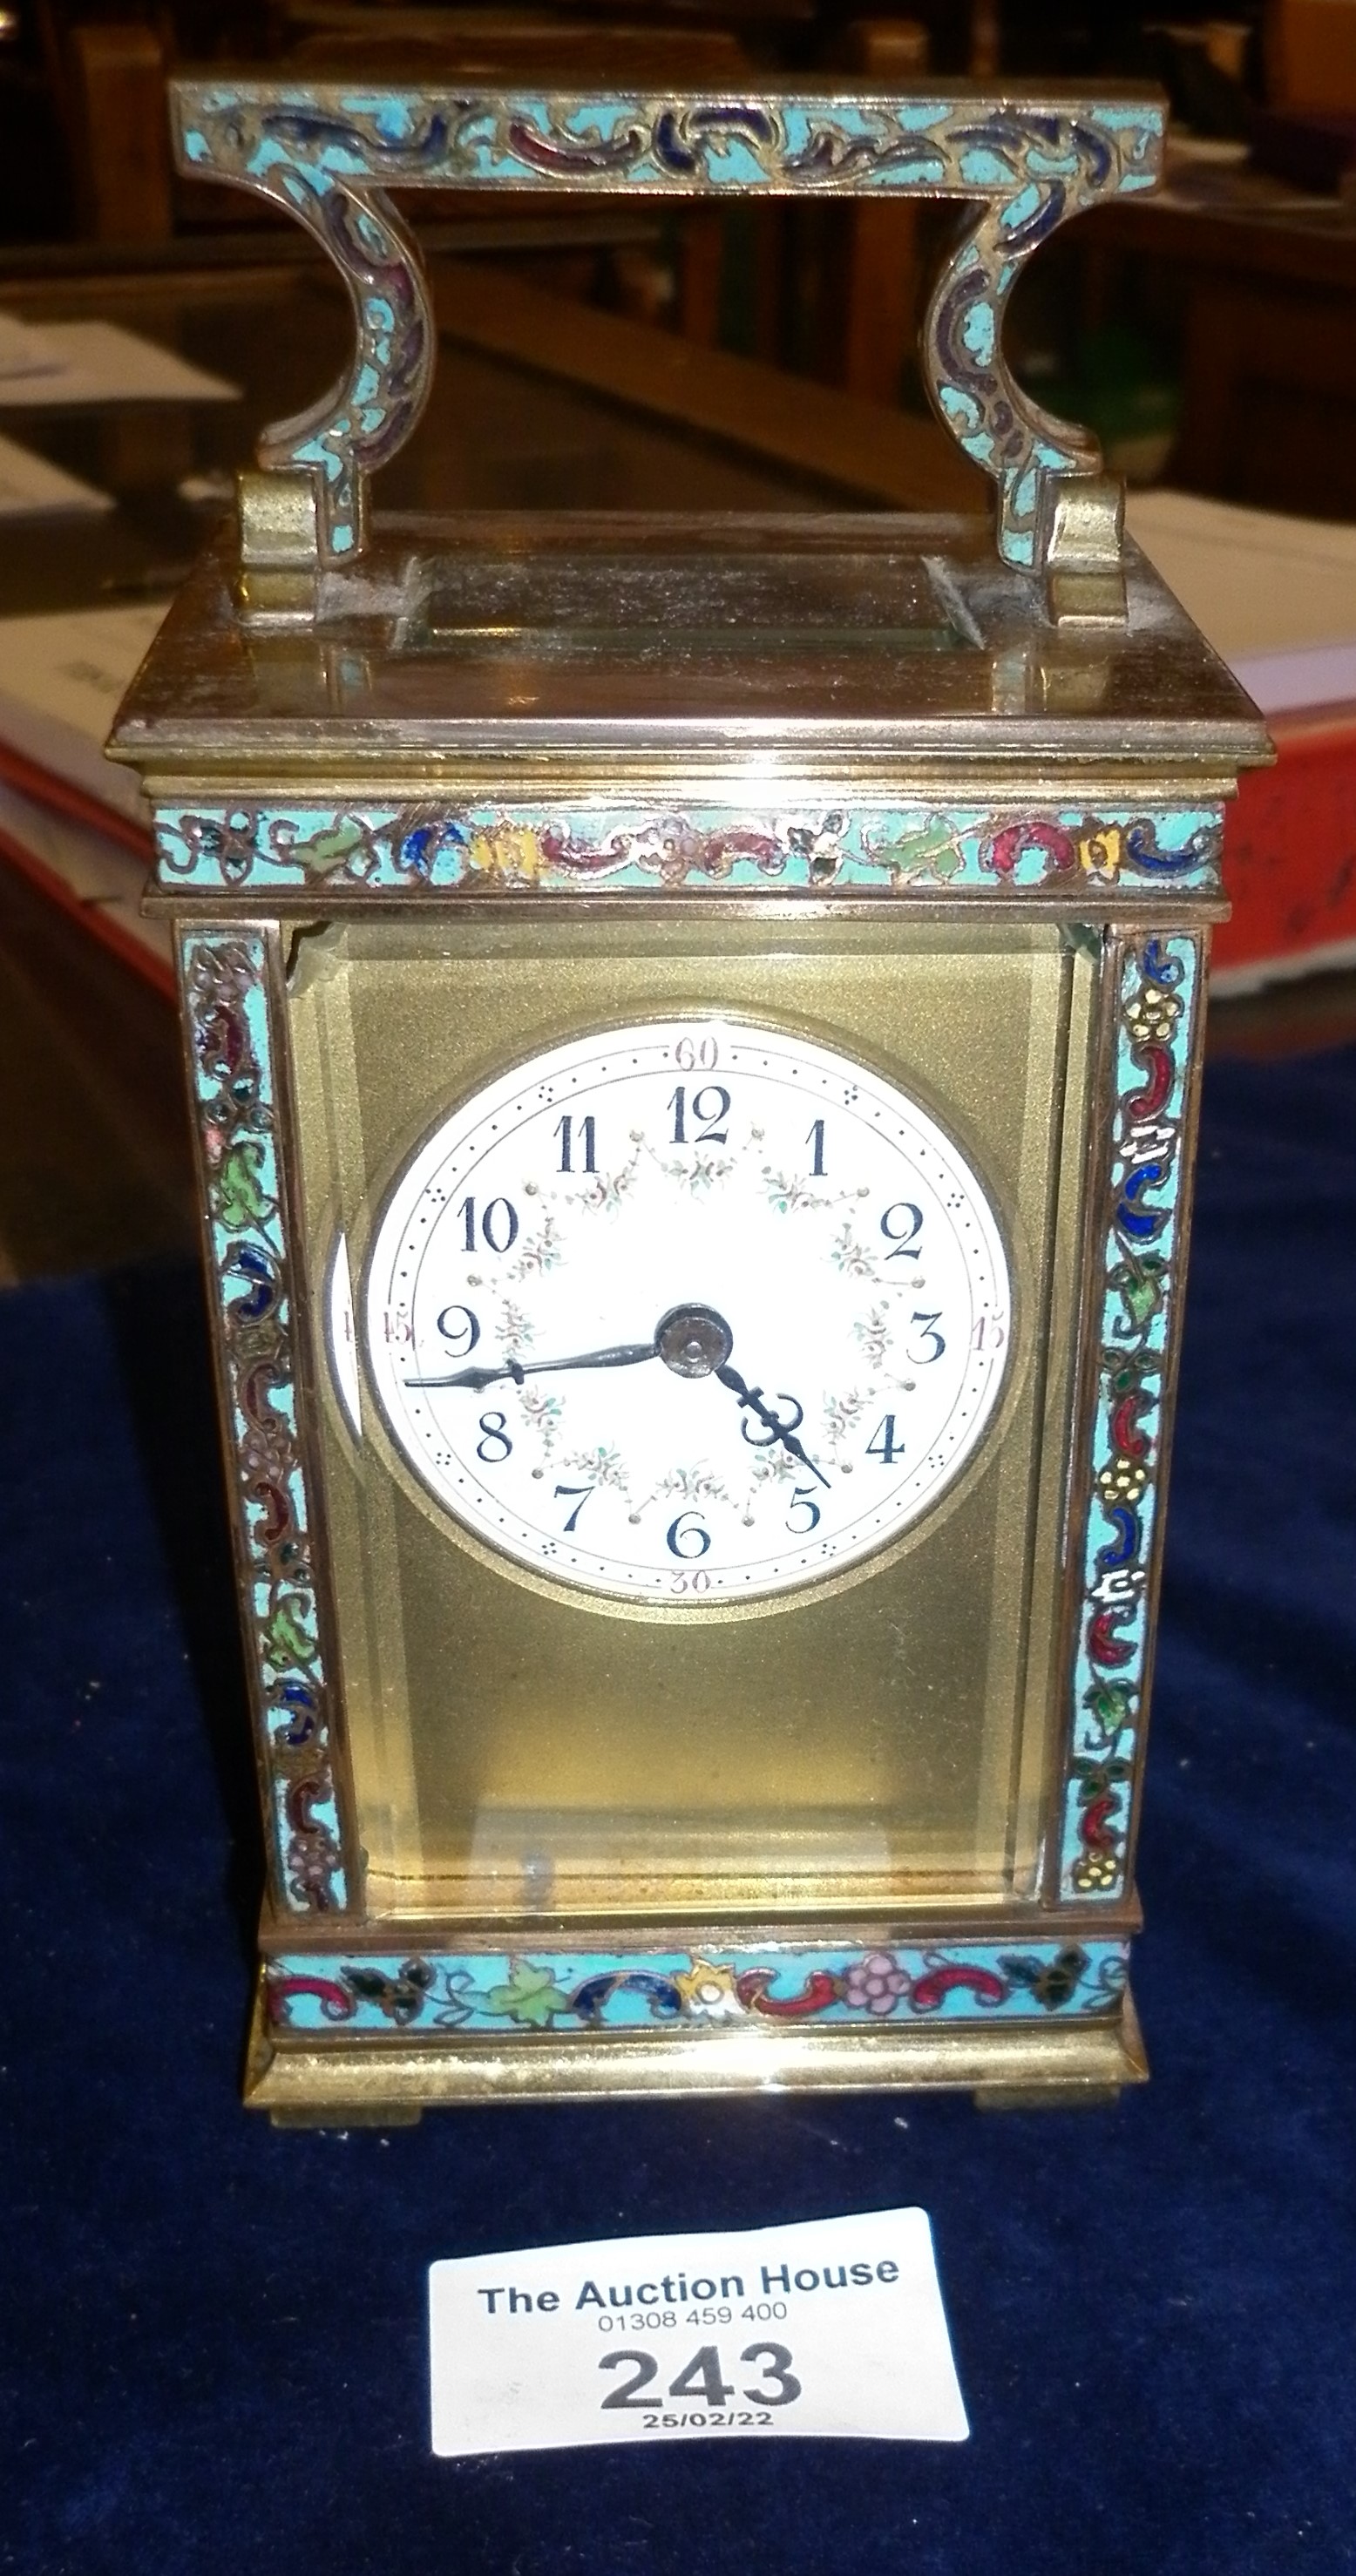 Victorian brass & champleve enamel carriage clock with enamel dial, 8-day French movement, needs